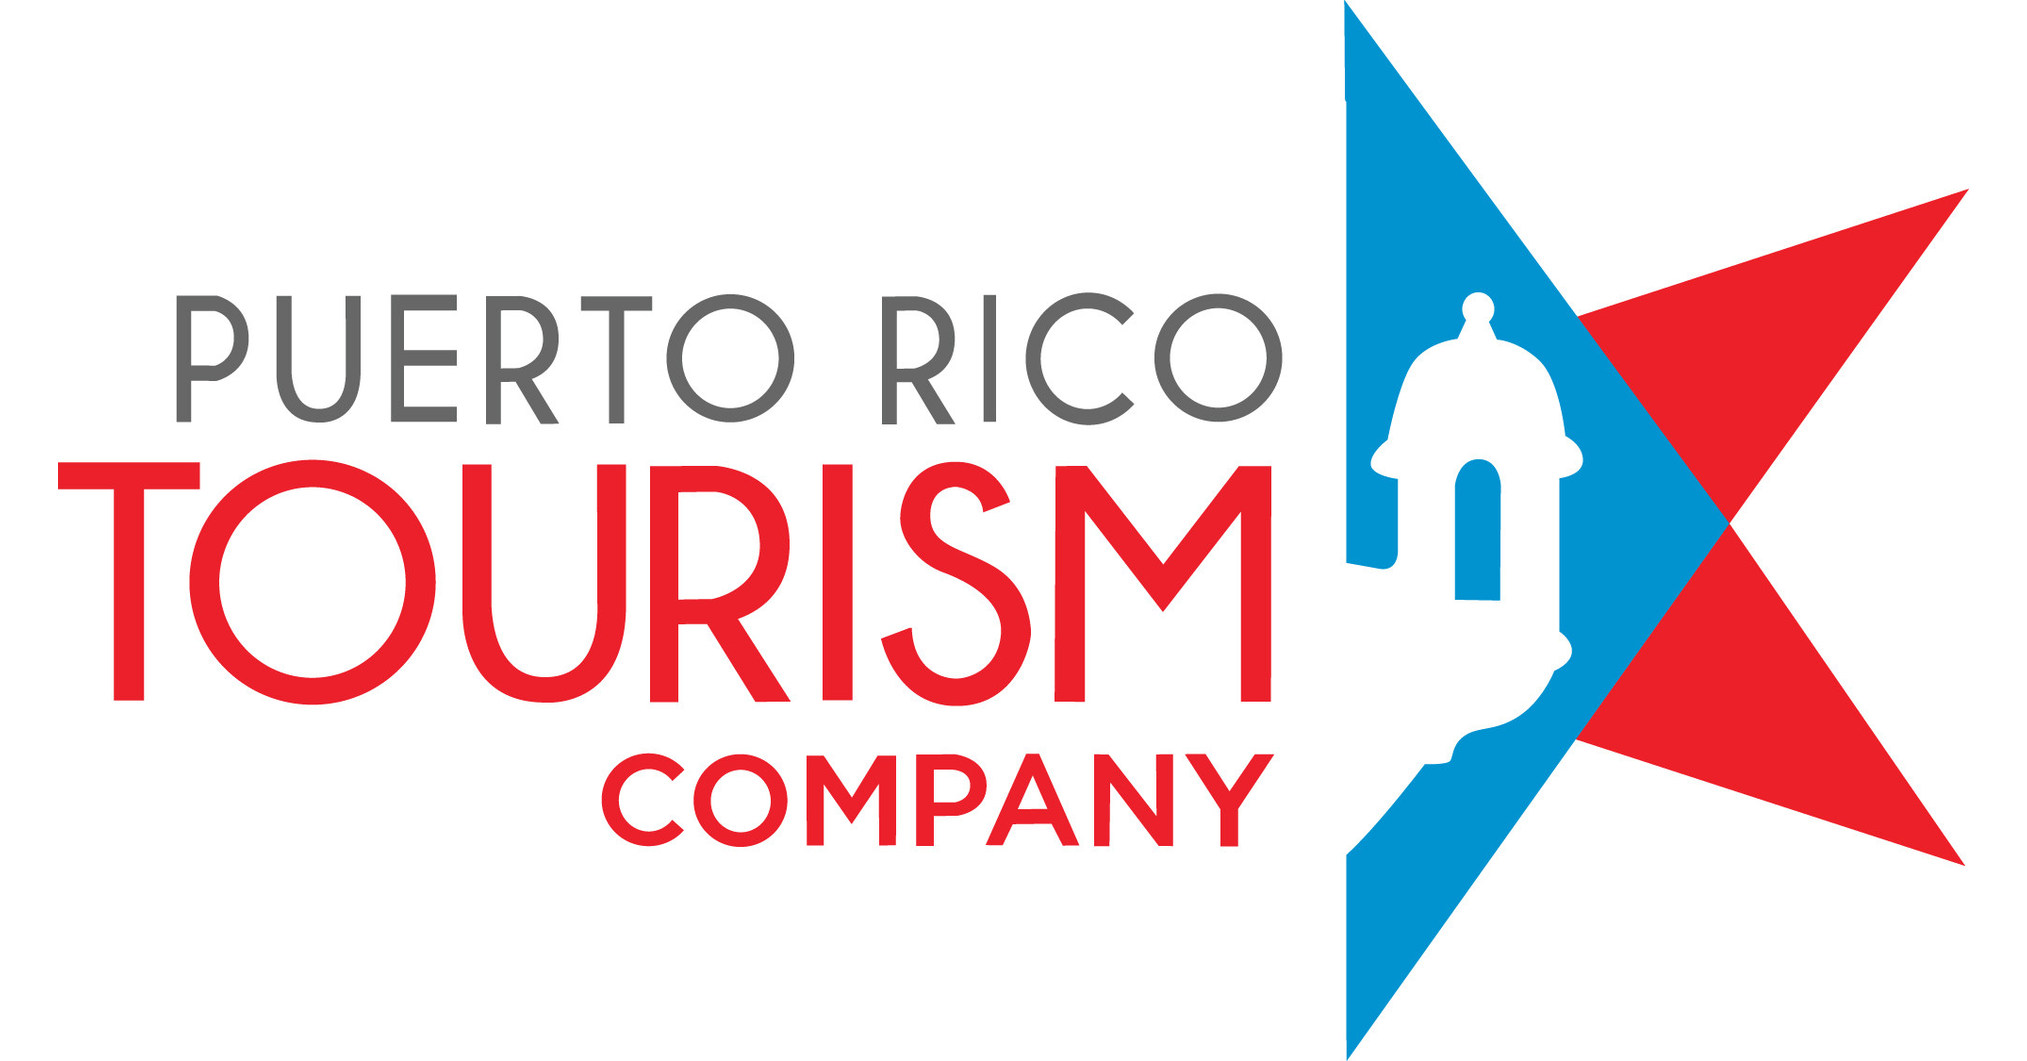 tourism industry in puerto rico